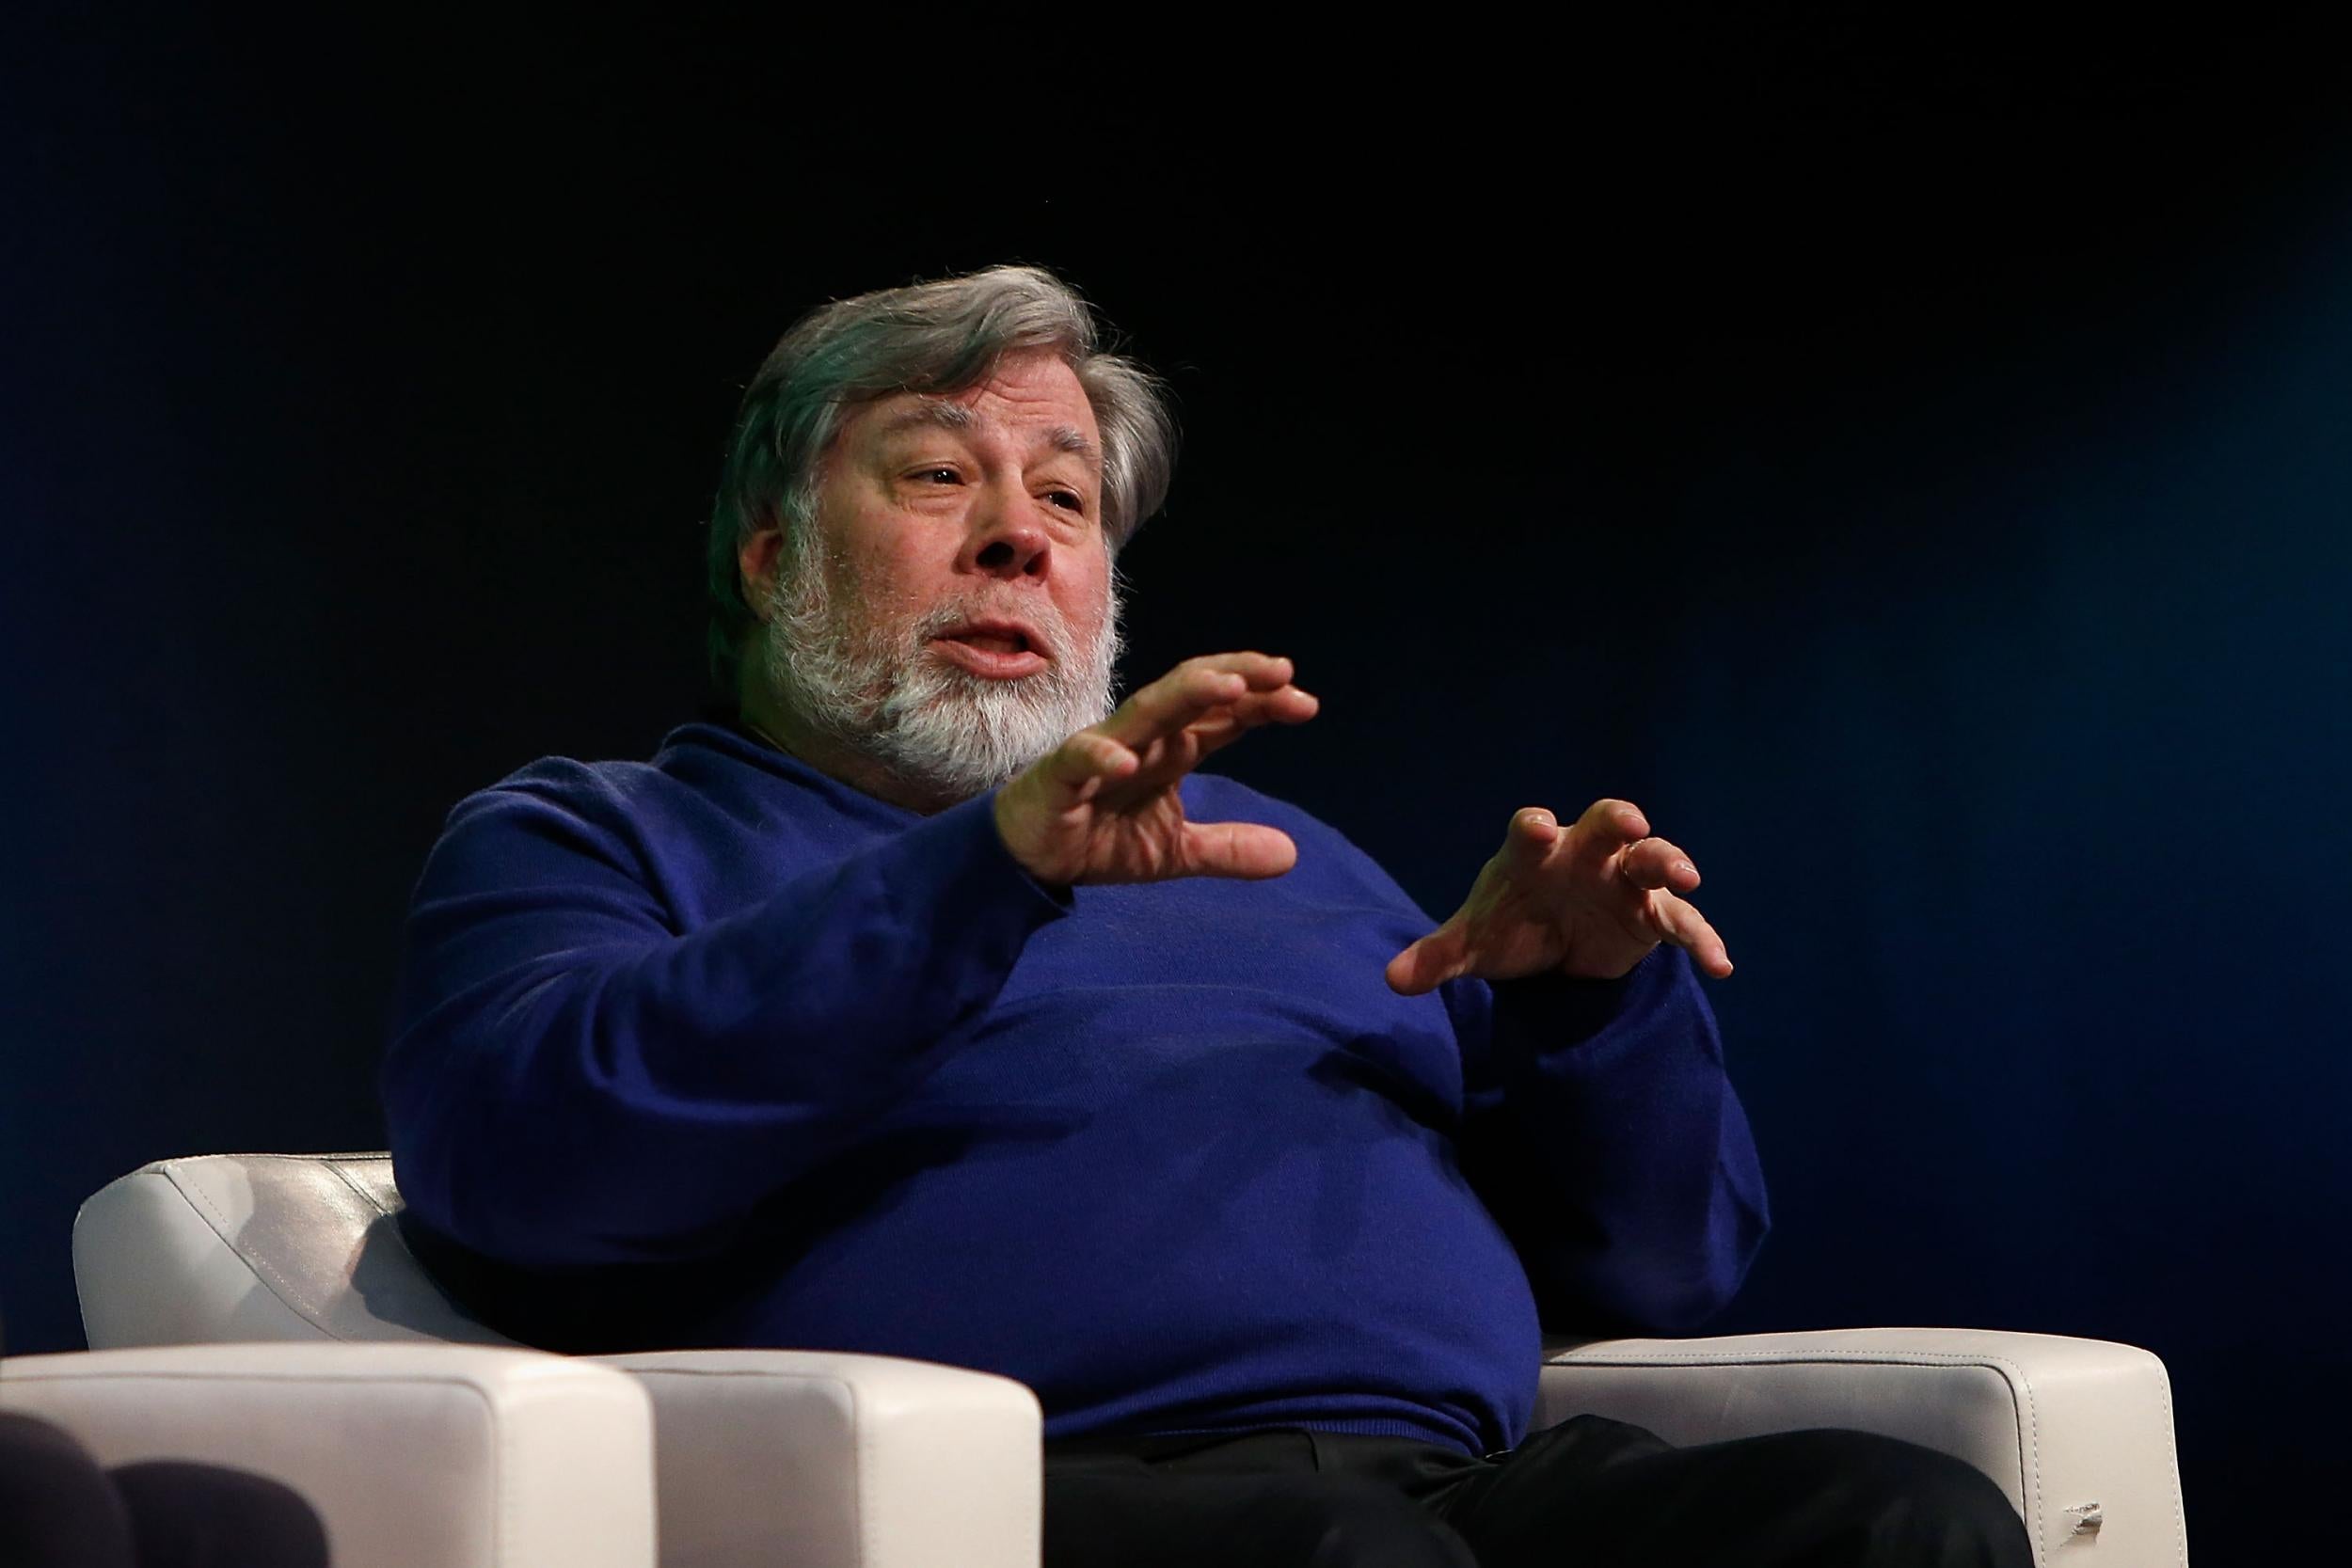 Steve Wozniak waved goodbye to his 5,000 Facebook friends in order to better protect his personal data